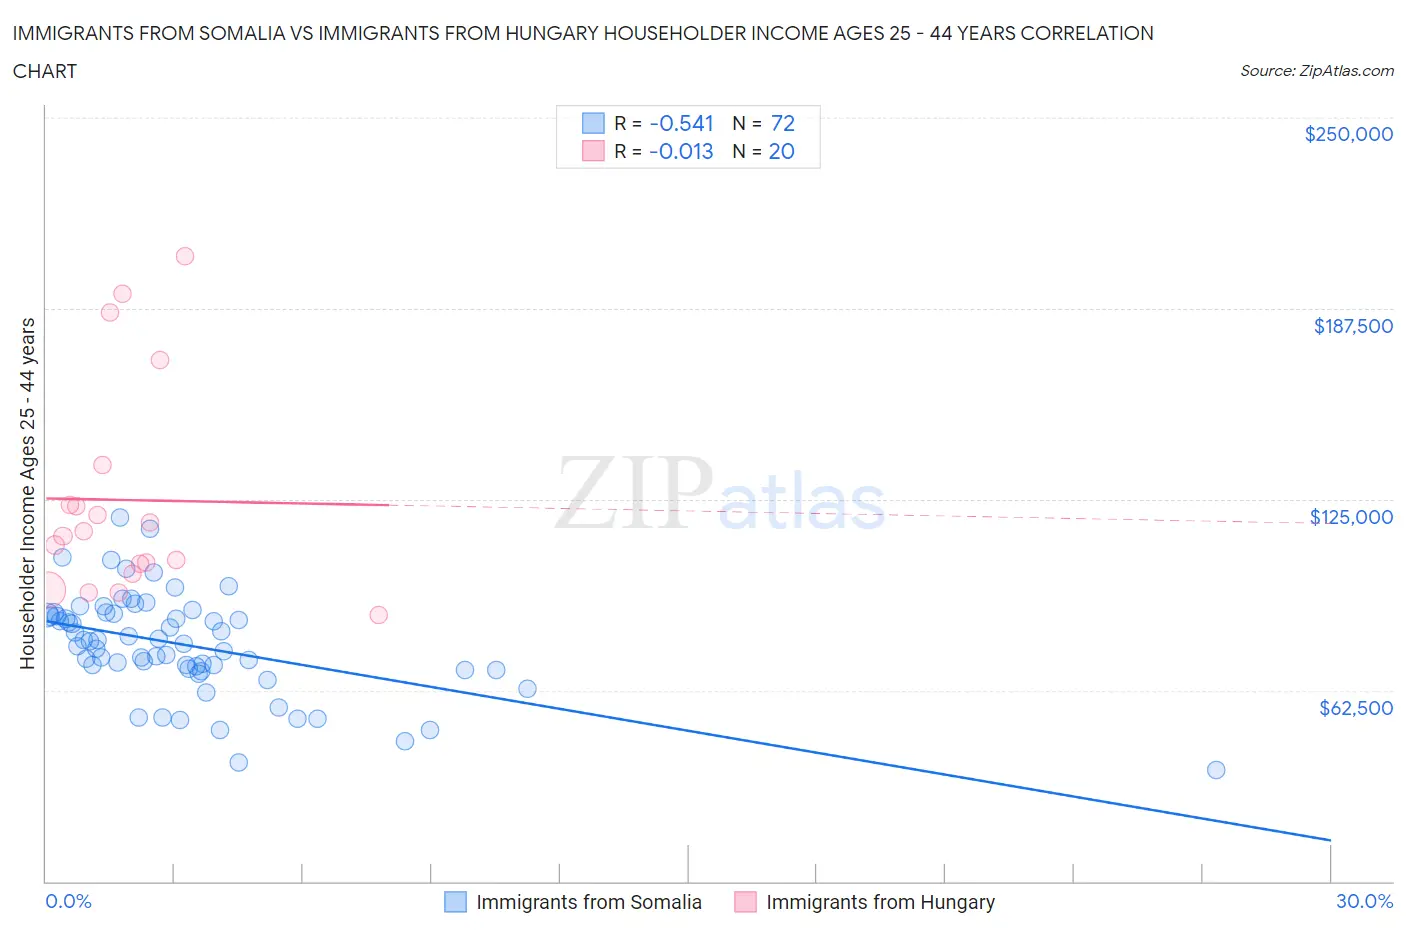 Immigrants from Somalia vs Immigrants from Hungary Householder Income Ages 25 - 44 years